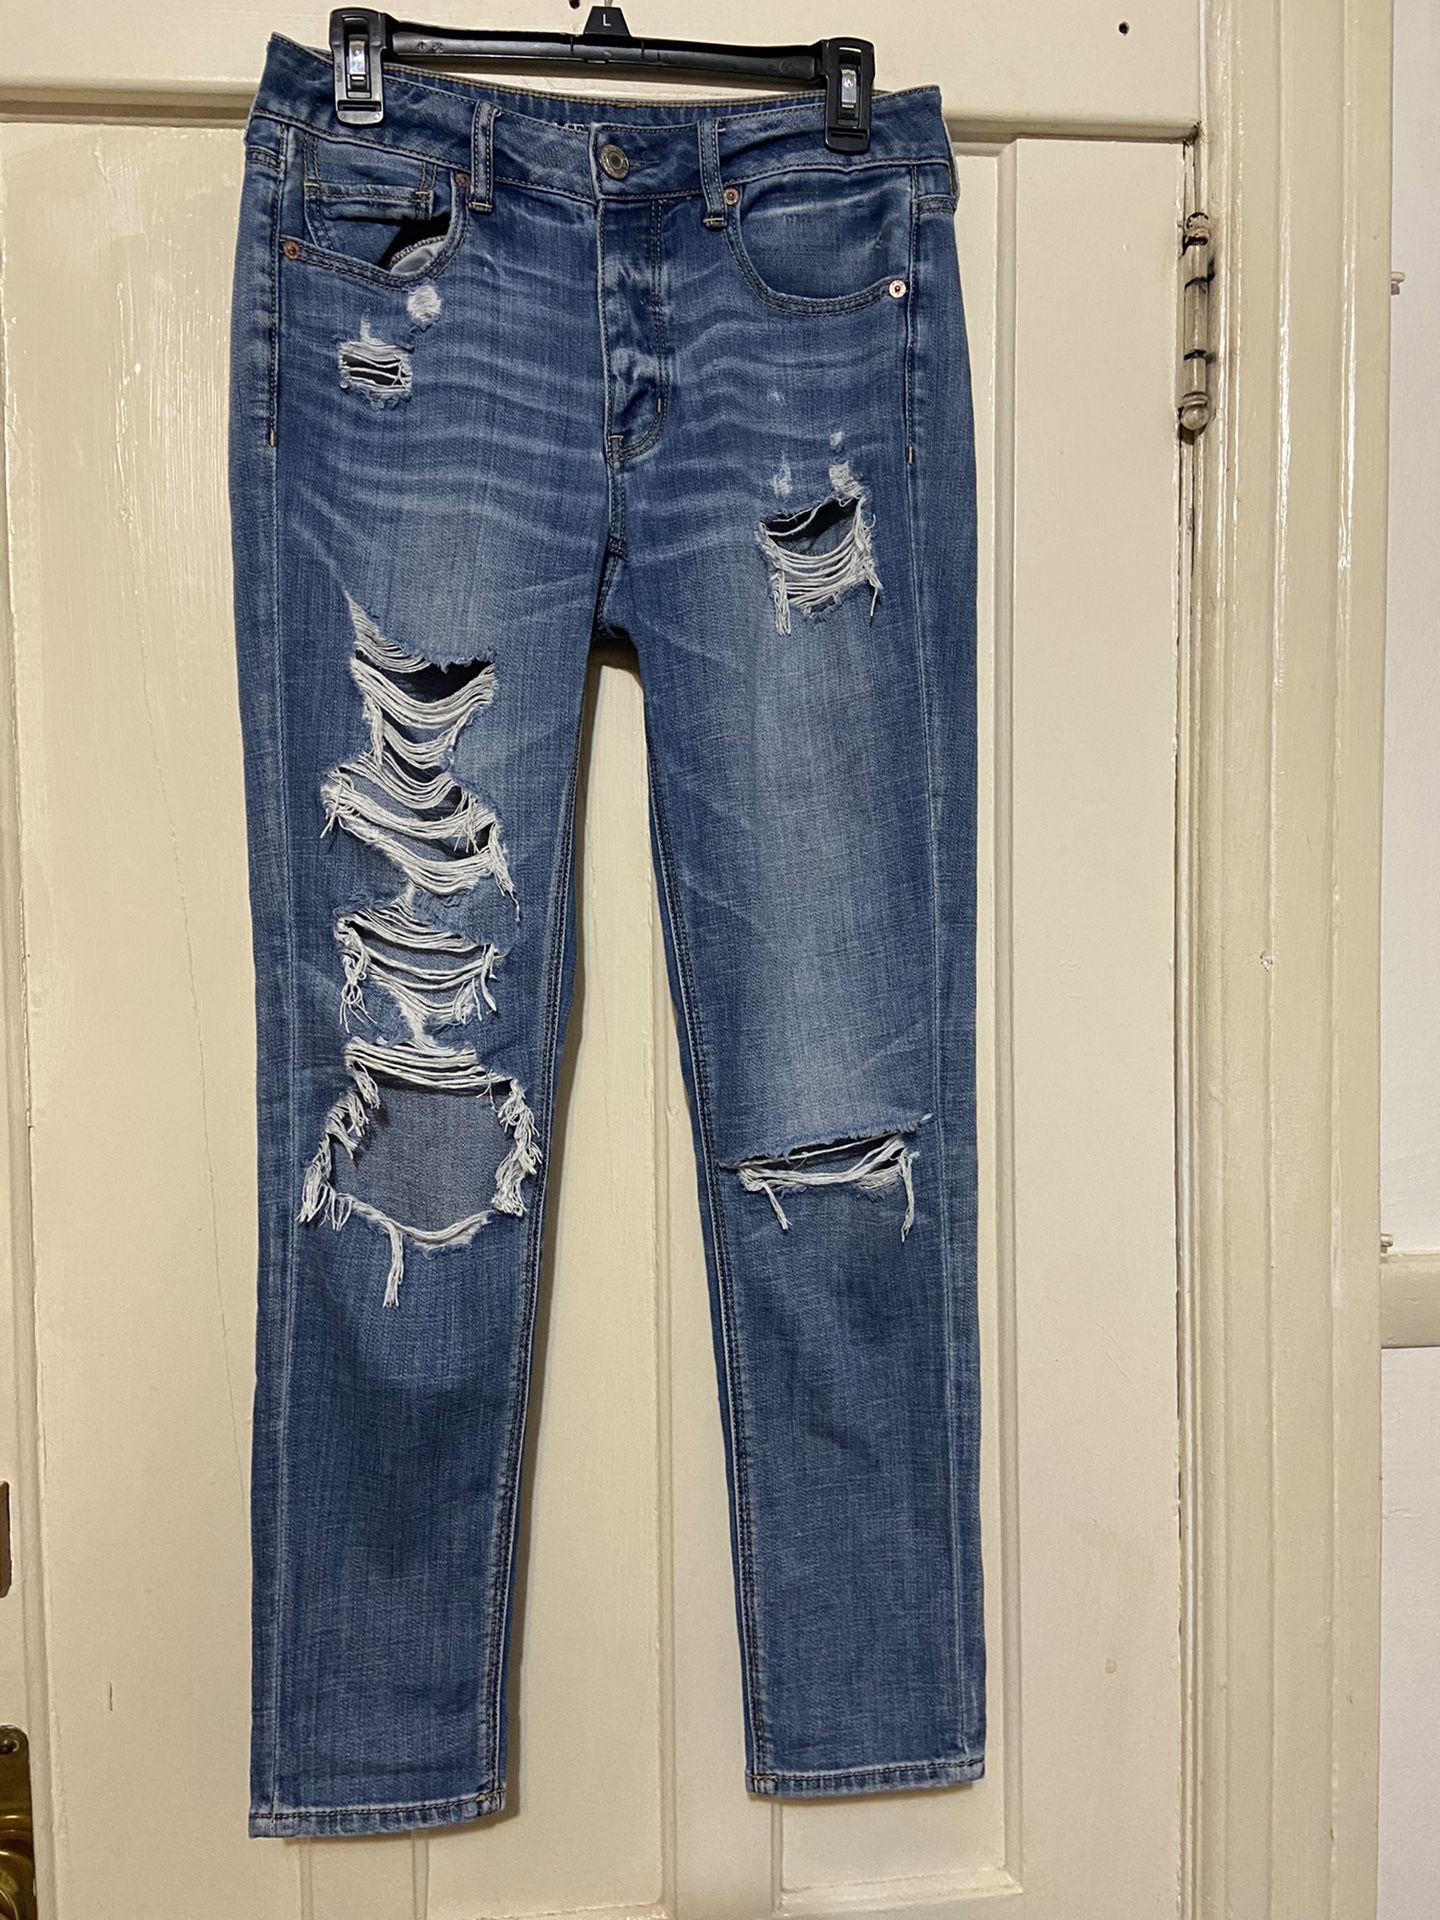 American Eagle Outfitters Women’s Tom girl Ripped Jeans Size 4